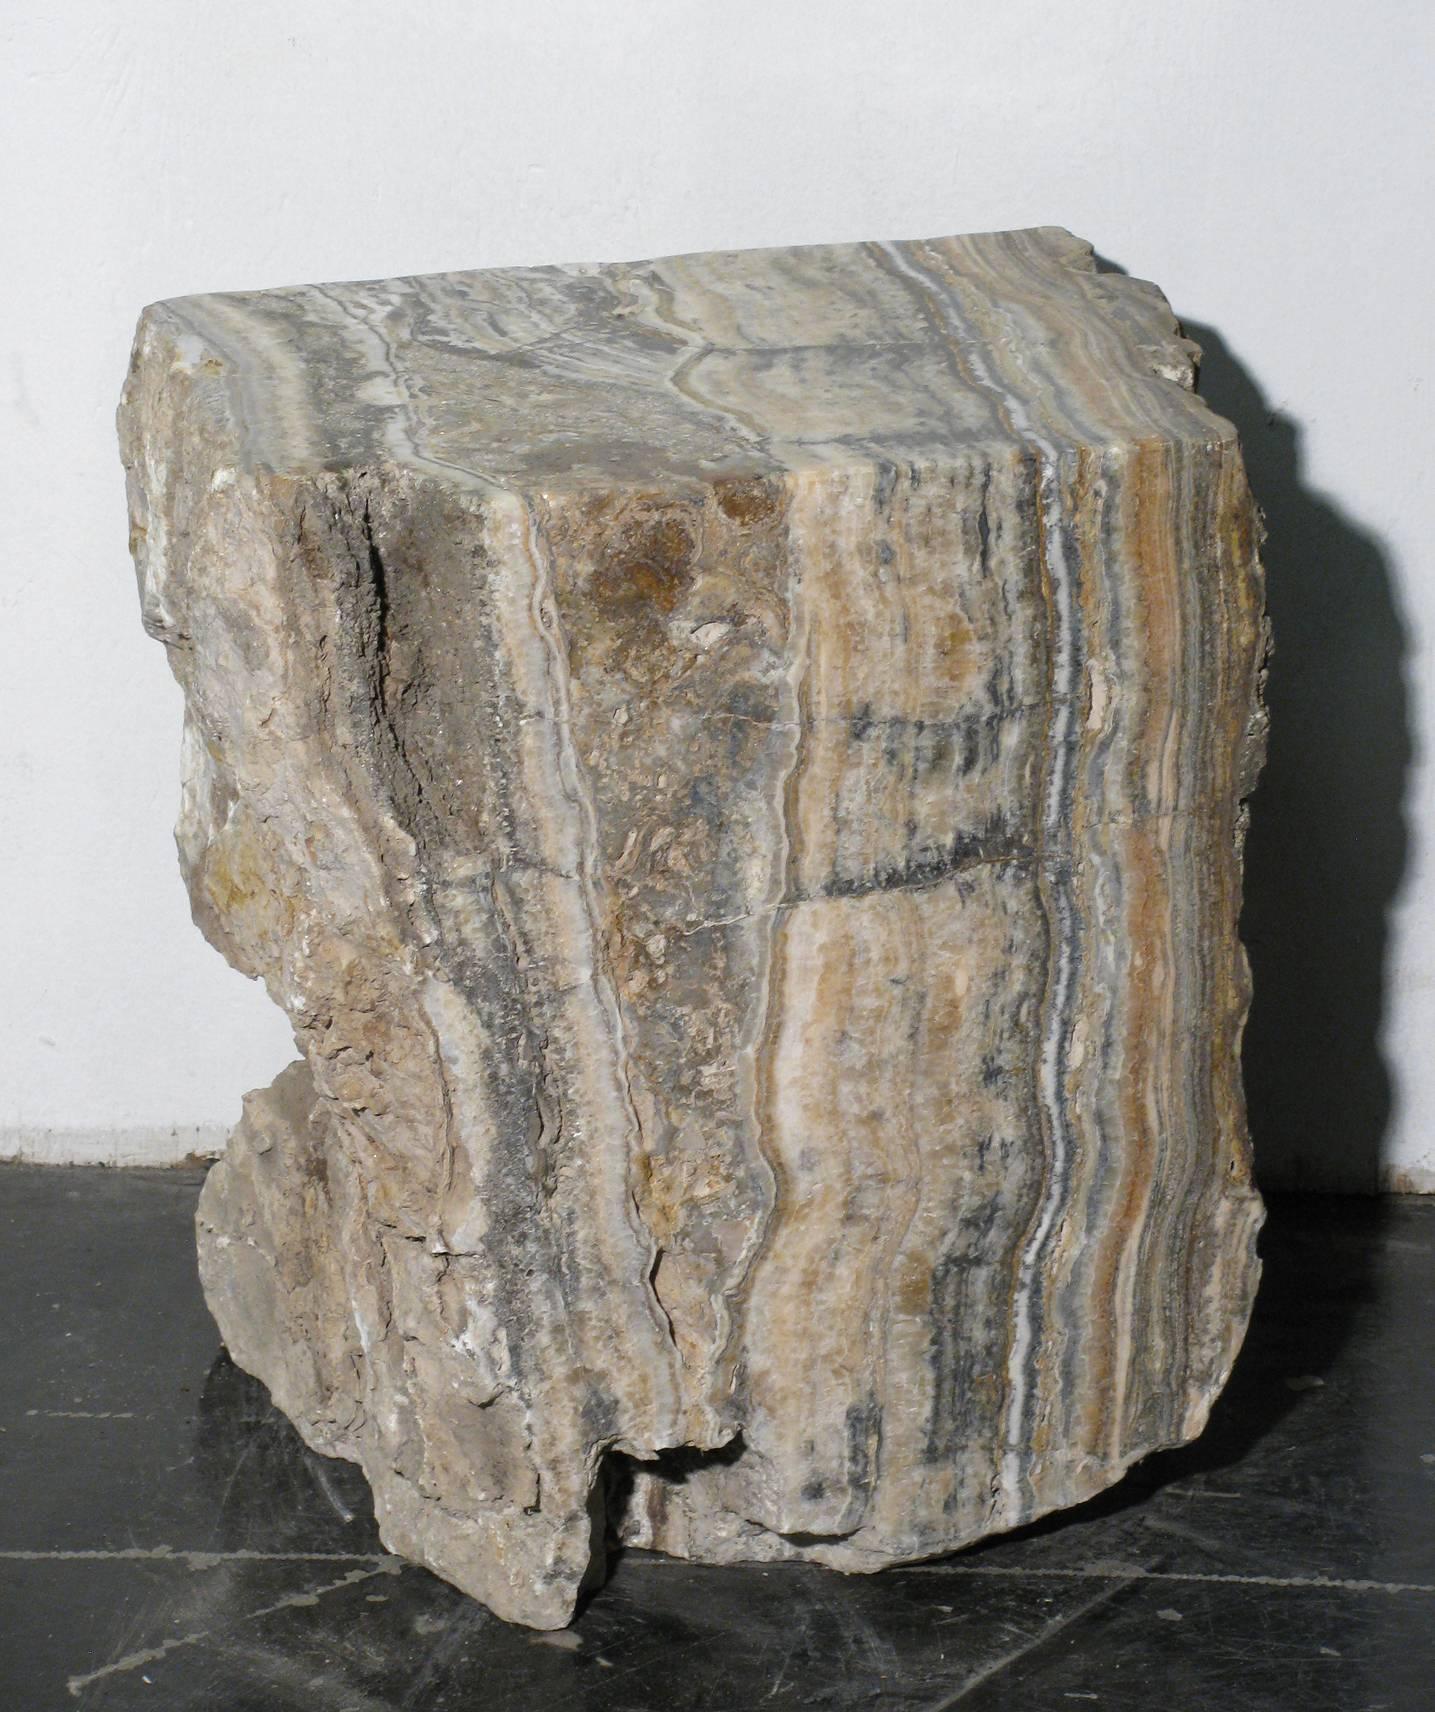 Organic form petrified onyx stump as a coffee table, stool or side table. Color hues are mostly gray and taupe with streaks of amber. We have three stumps available that make a nice trio in front of a sofa. (Measurements taken at widest points).